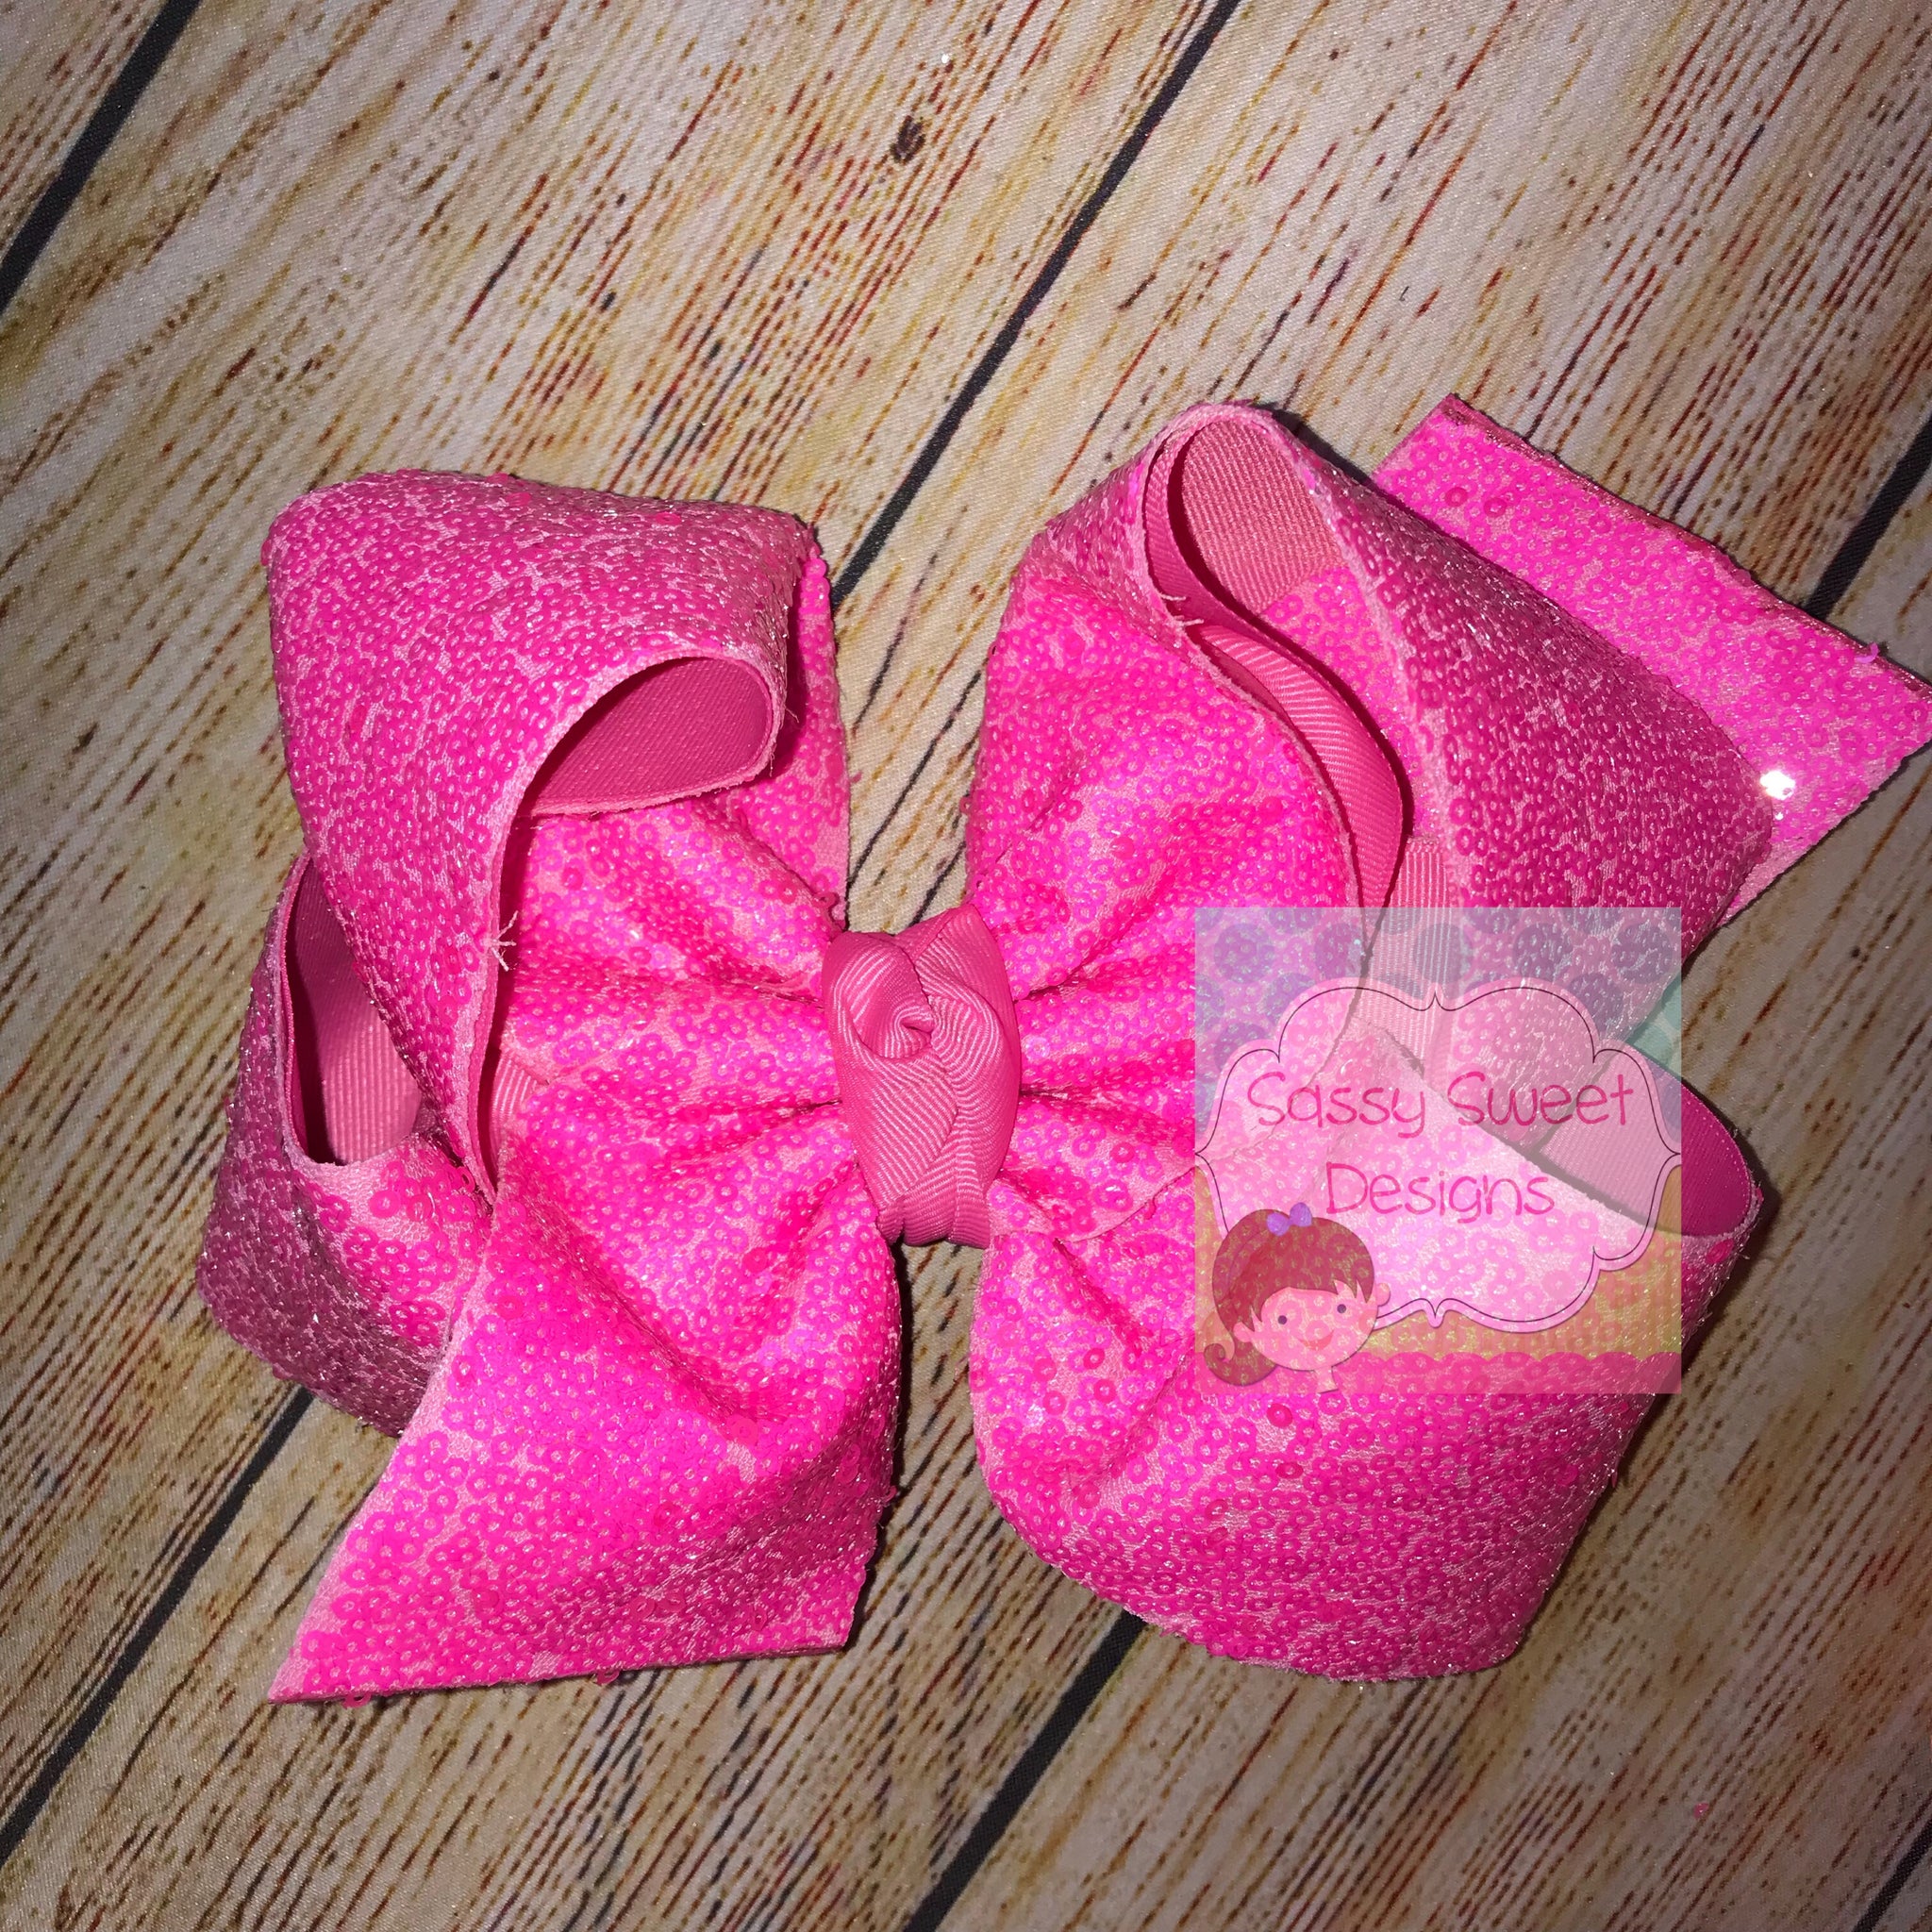 Neon PInk Sassy Sequins Hair Bow